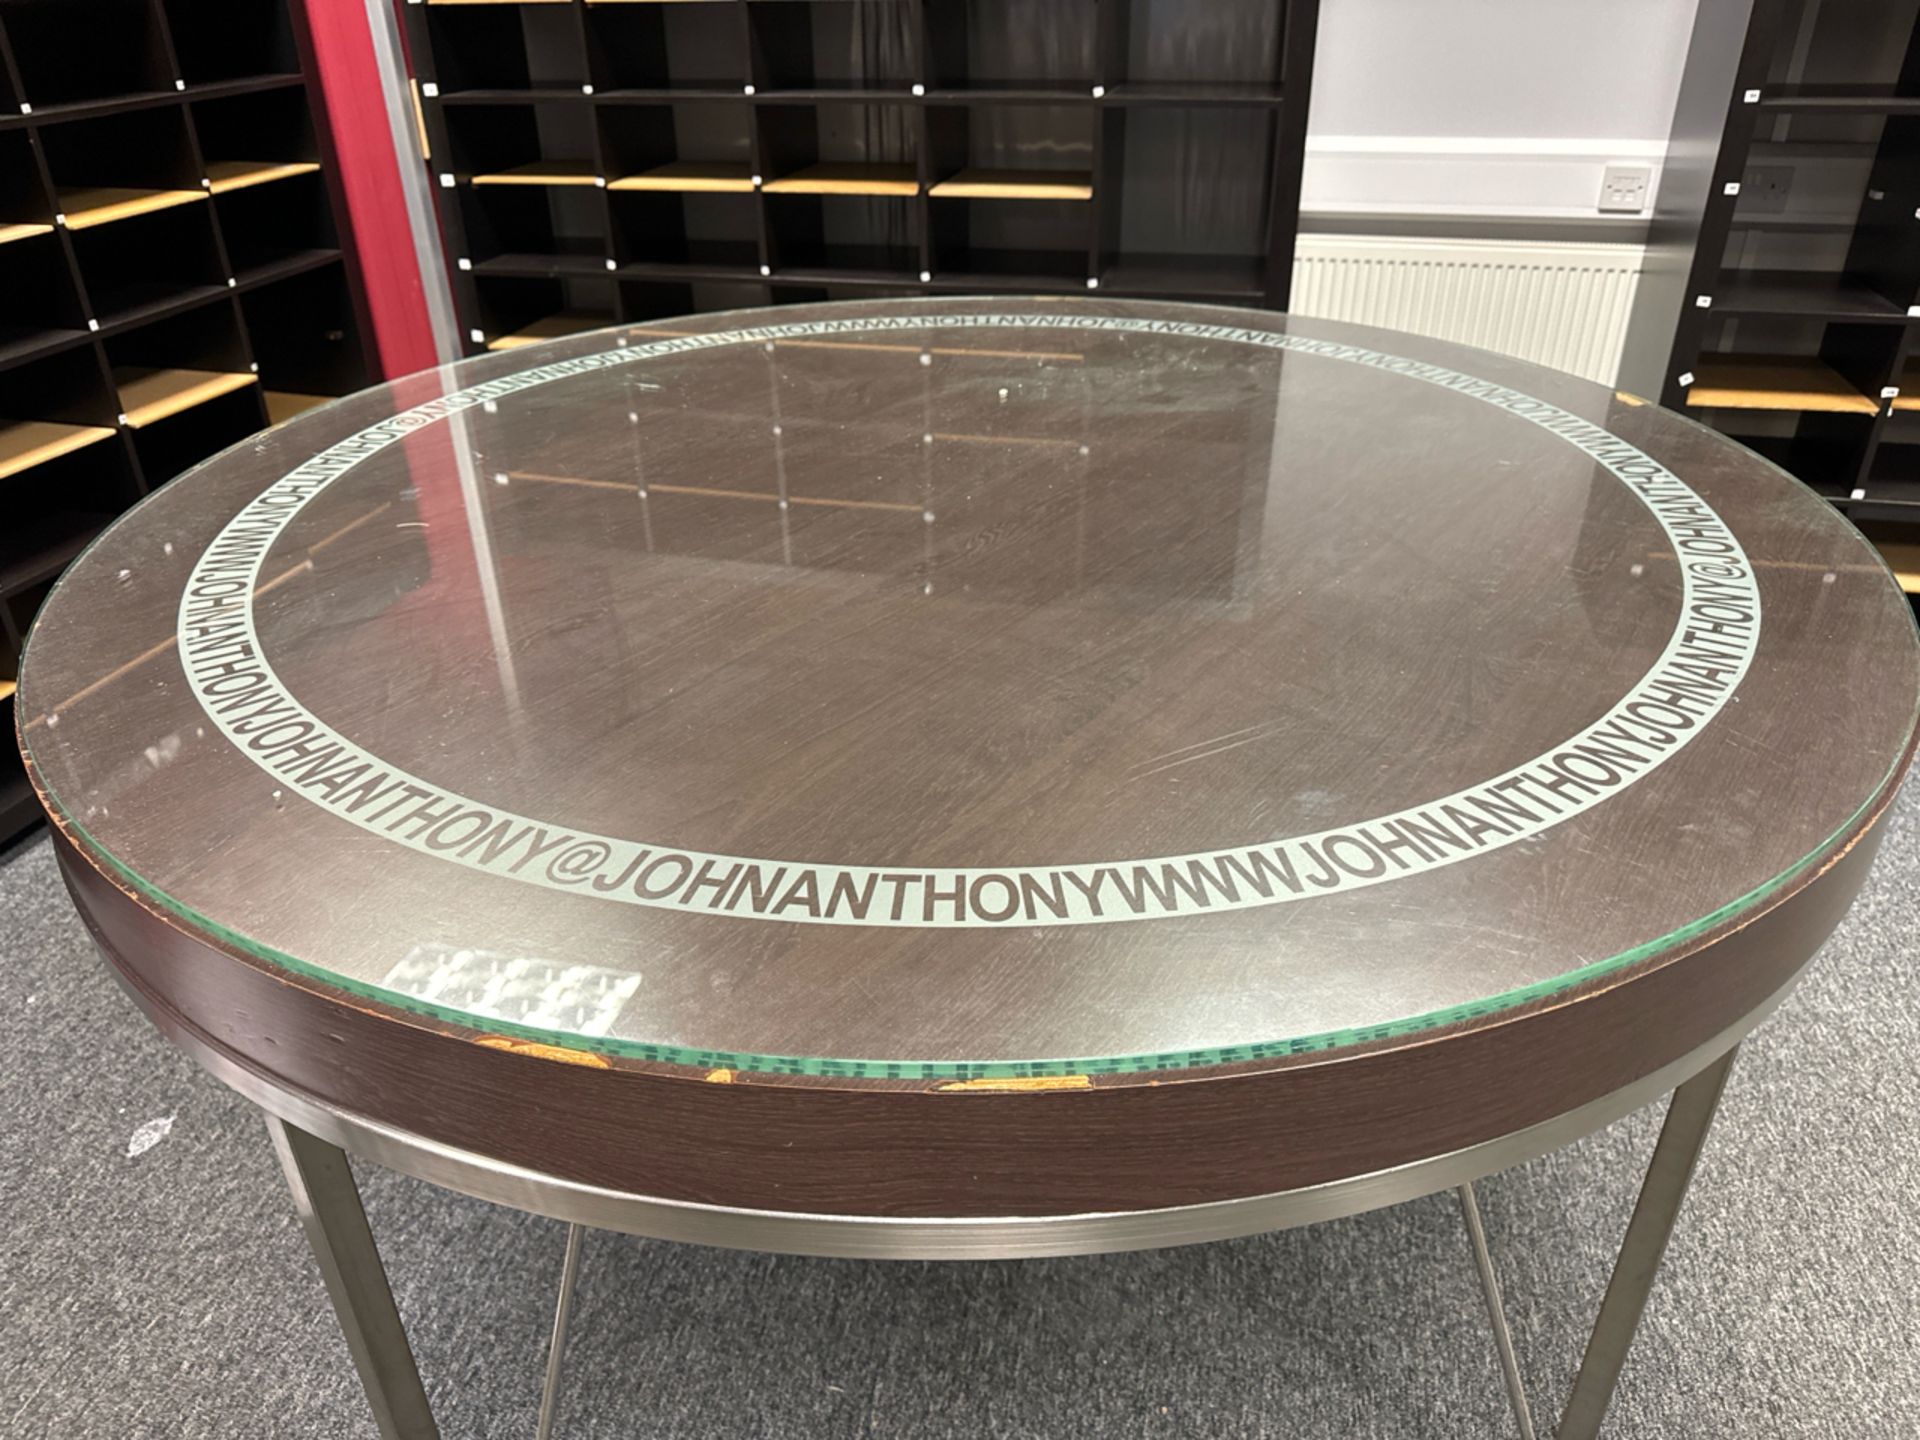 John Anthony Branded Circular Wood Table with Glass Top - Image 2 of 4